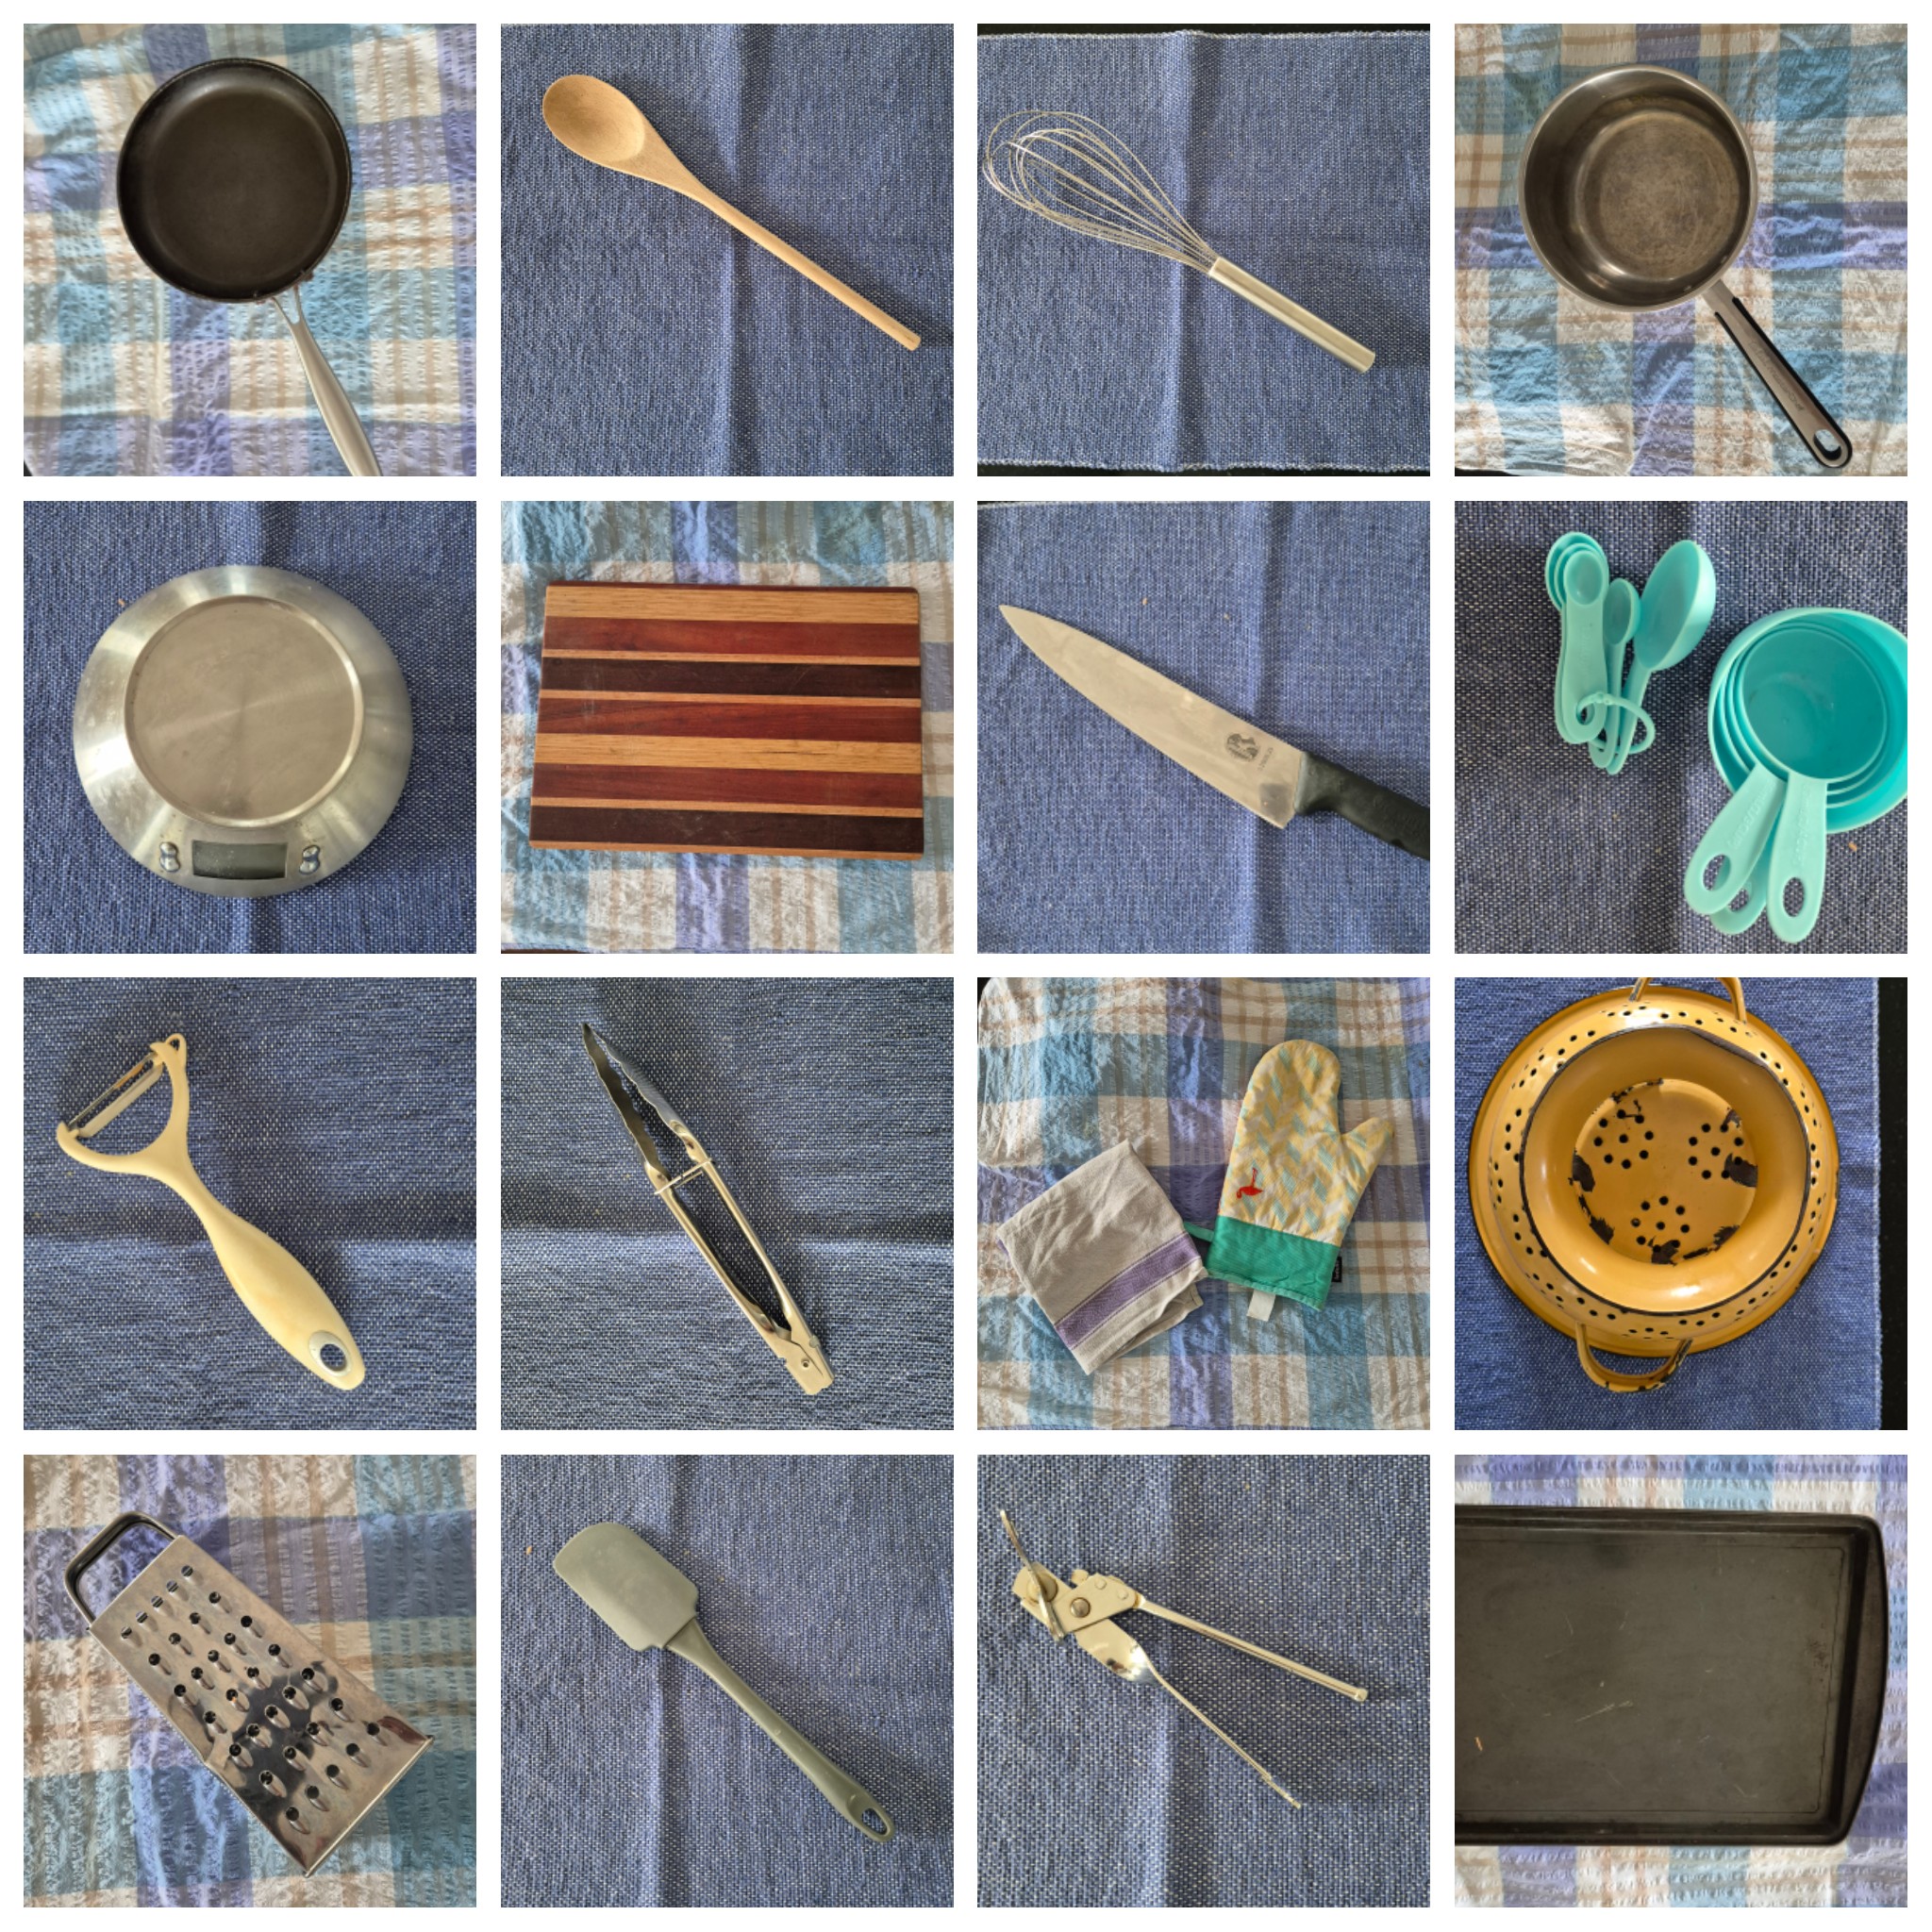 A grid image of essential kitchen utensils. There is a frying pan, wooden spoon, whisk, saucepan, scales, chopping board, knife, meauring spoons and cups, peeler, tongs, oven mits and tea towel, colander, grater, spatula, tongs and baking tray